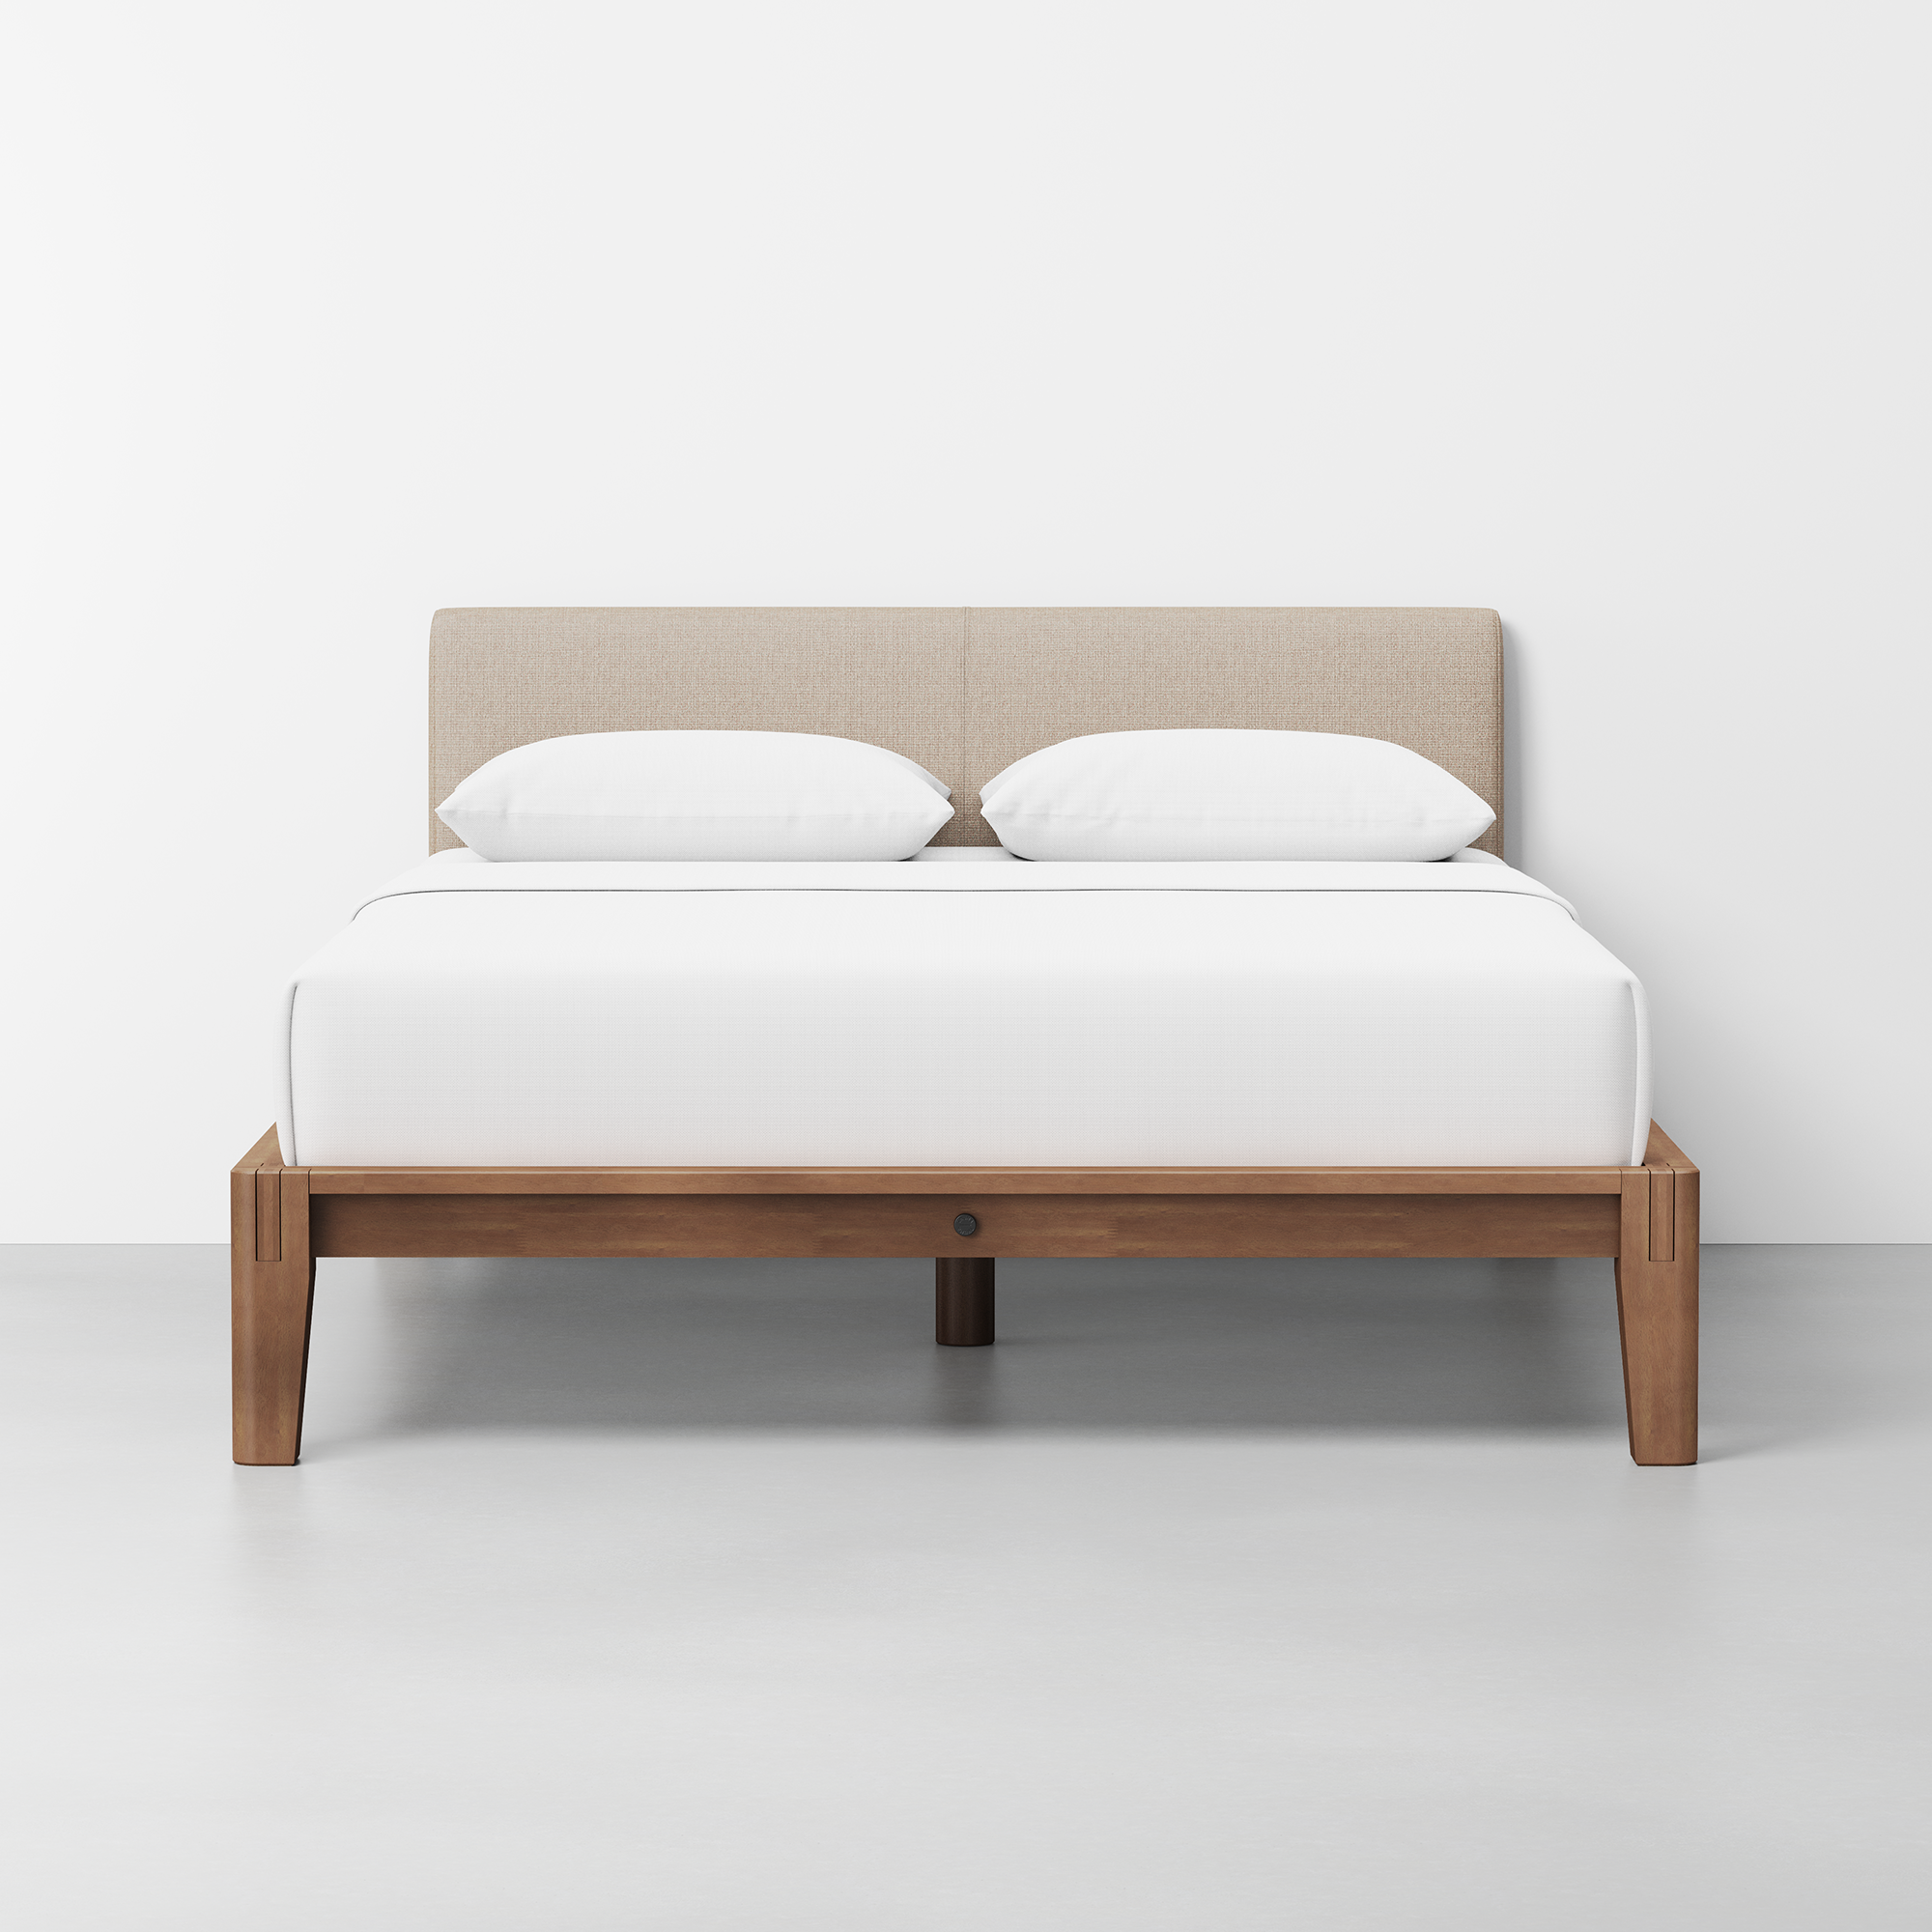 The Bed (Walnut / Dune) - Render - Front